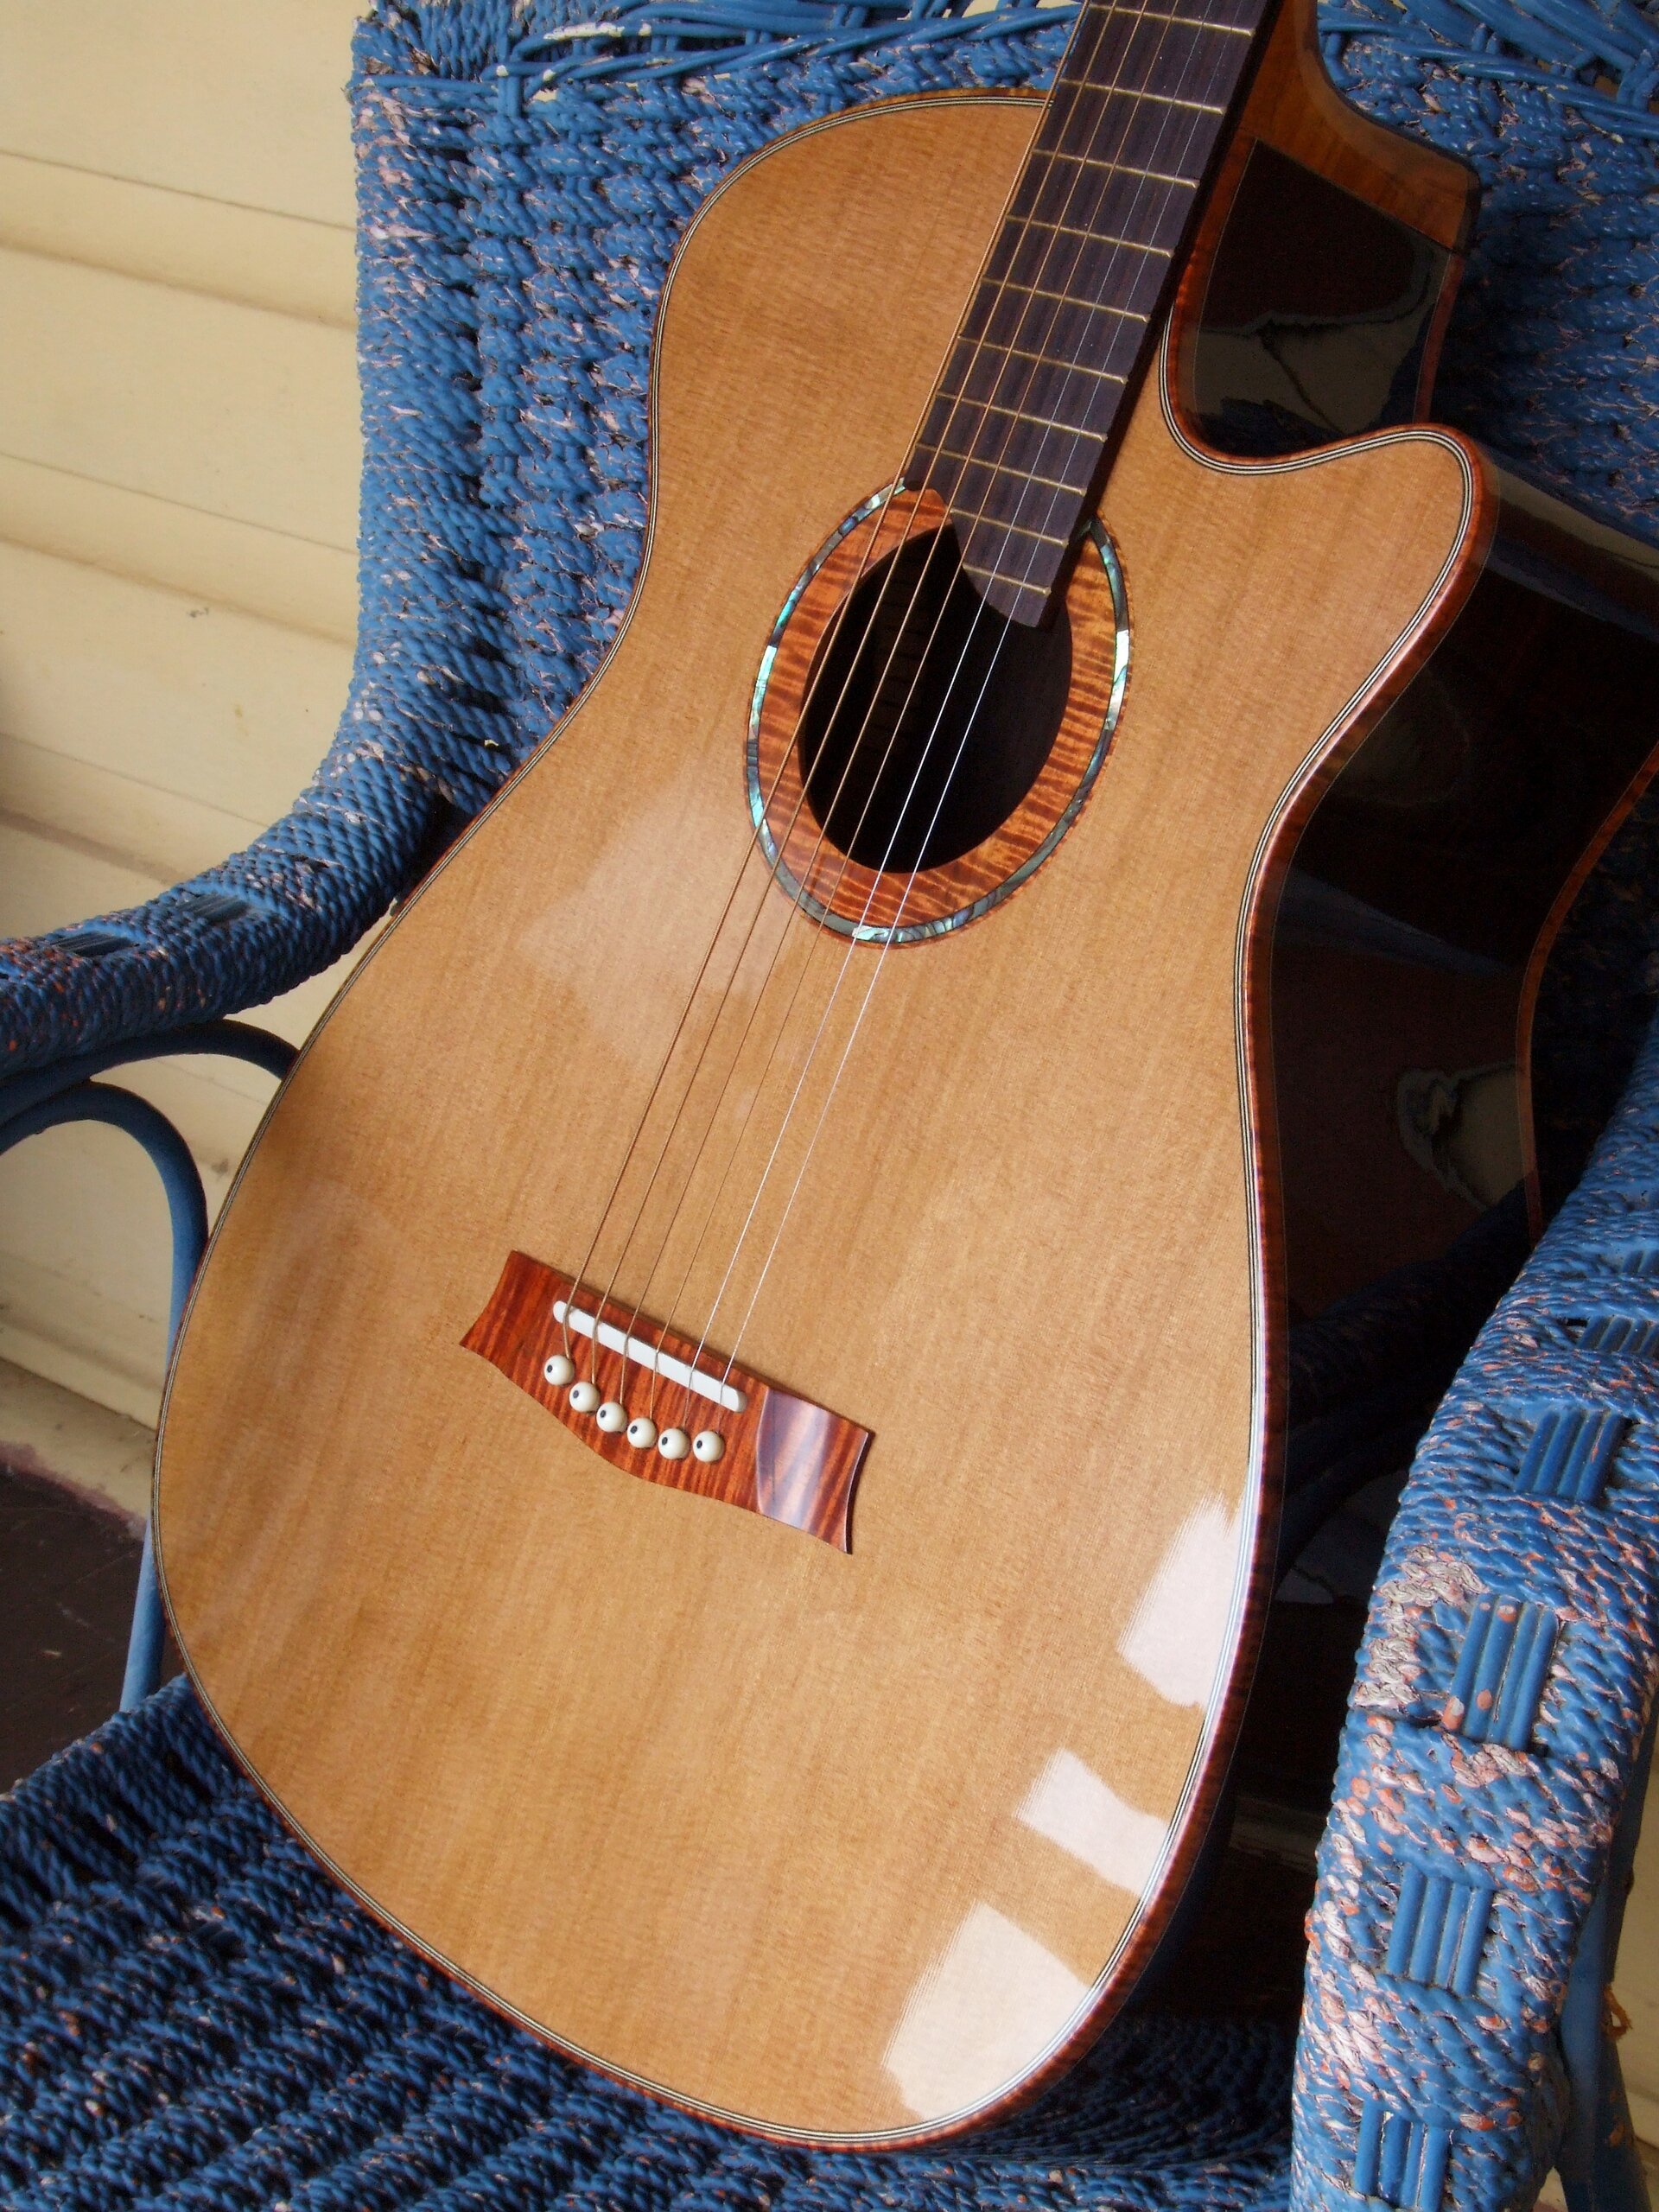 Cedar and rosewood steel string guitar sat on a blue wicker chair